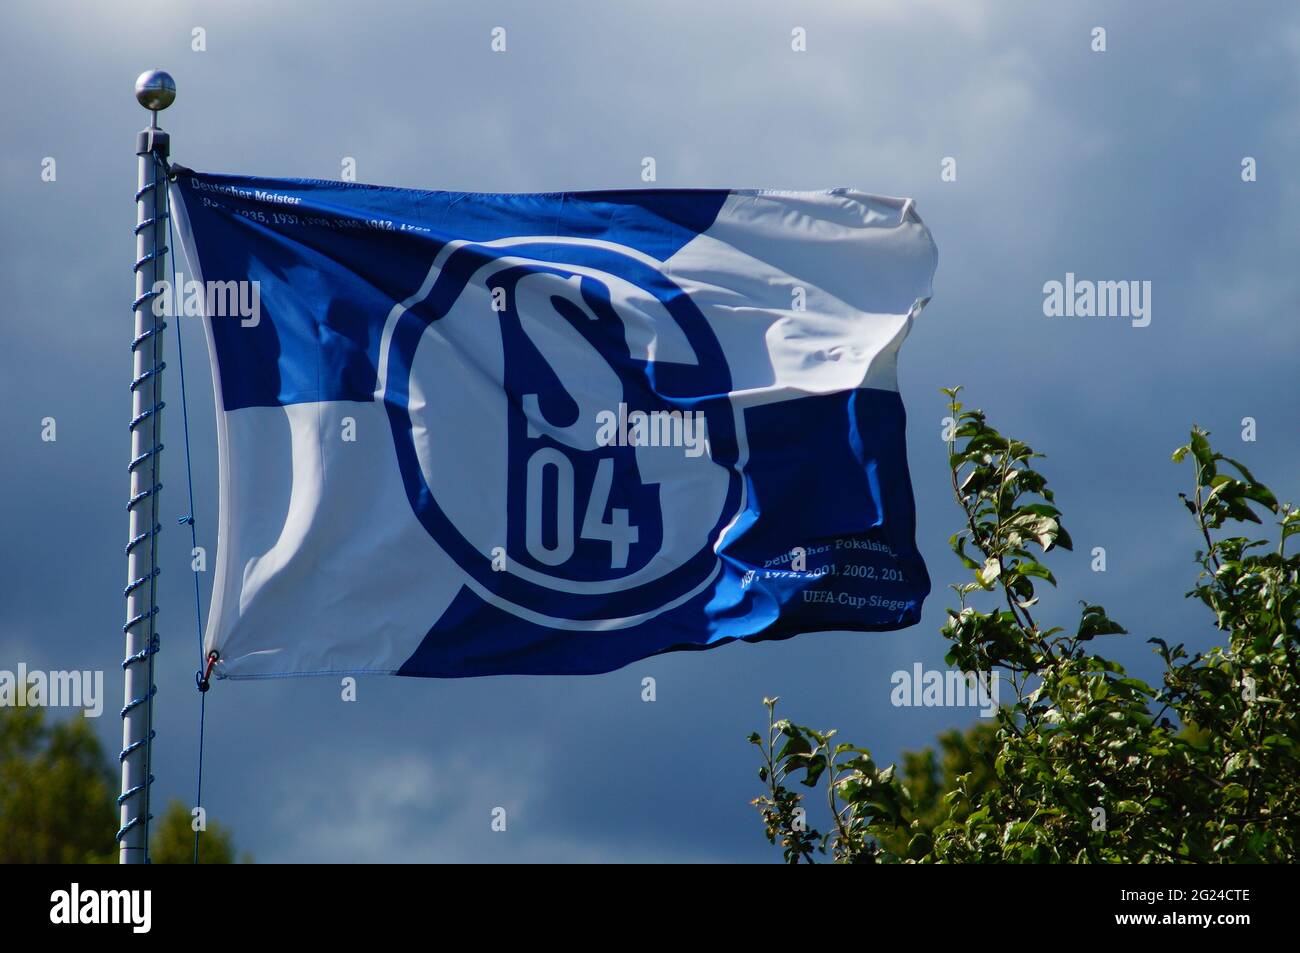 FRANKFURT, GERMANY - May 23, 2021: A Schalke 04 flag flies in an allotment garden in Frankfurt. After 30 years in the 1st Bundesliga, relegation to th Stock Photo